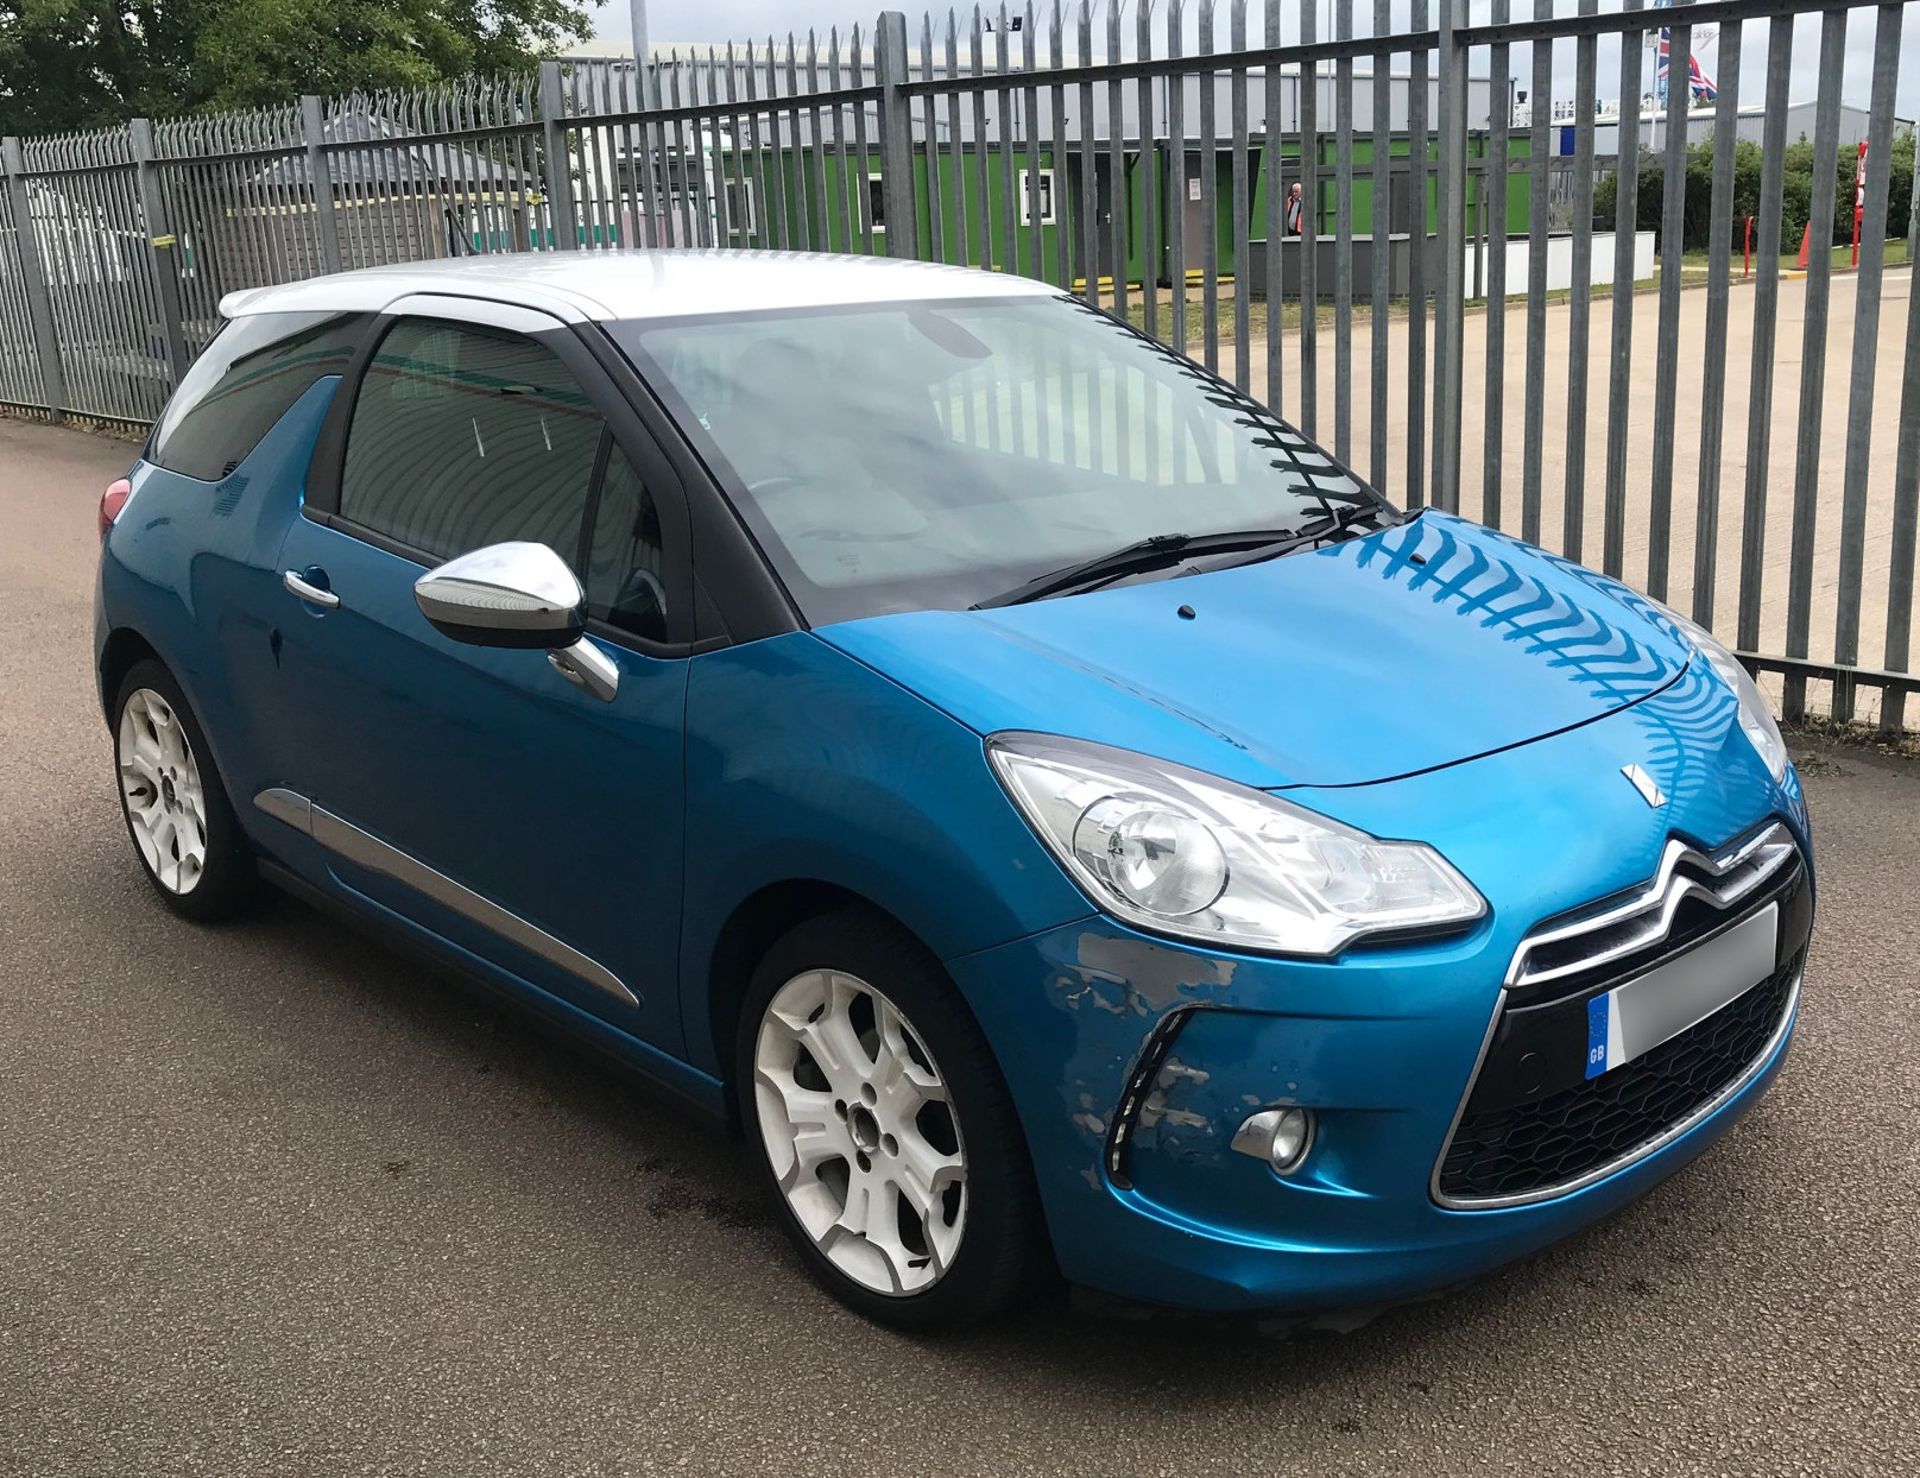 2013 Citroen DS3 1.6 e-HDi 110 Airdream DSport Plus 3dr Hatchback - CL505 - NO VAT ON THE HAMMER - Image 8 of 34